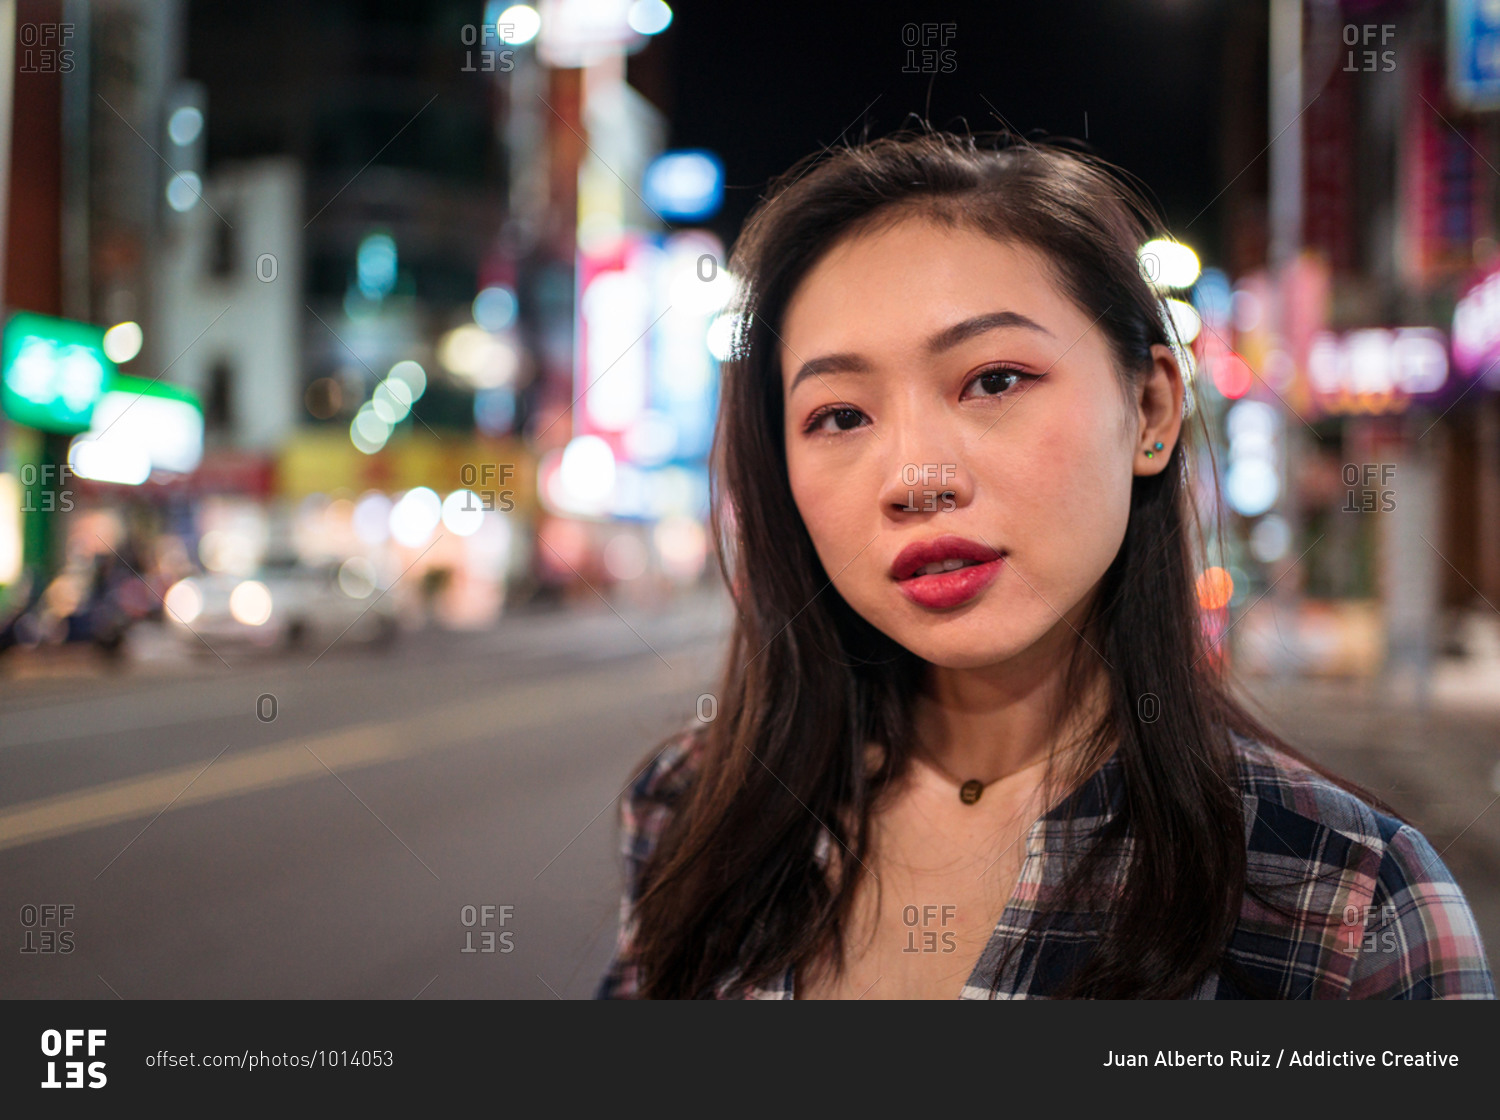 Millennial Asian female in checkered shirt looking at camera with smile while crossing street in modern illuminated city district at night time